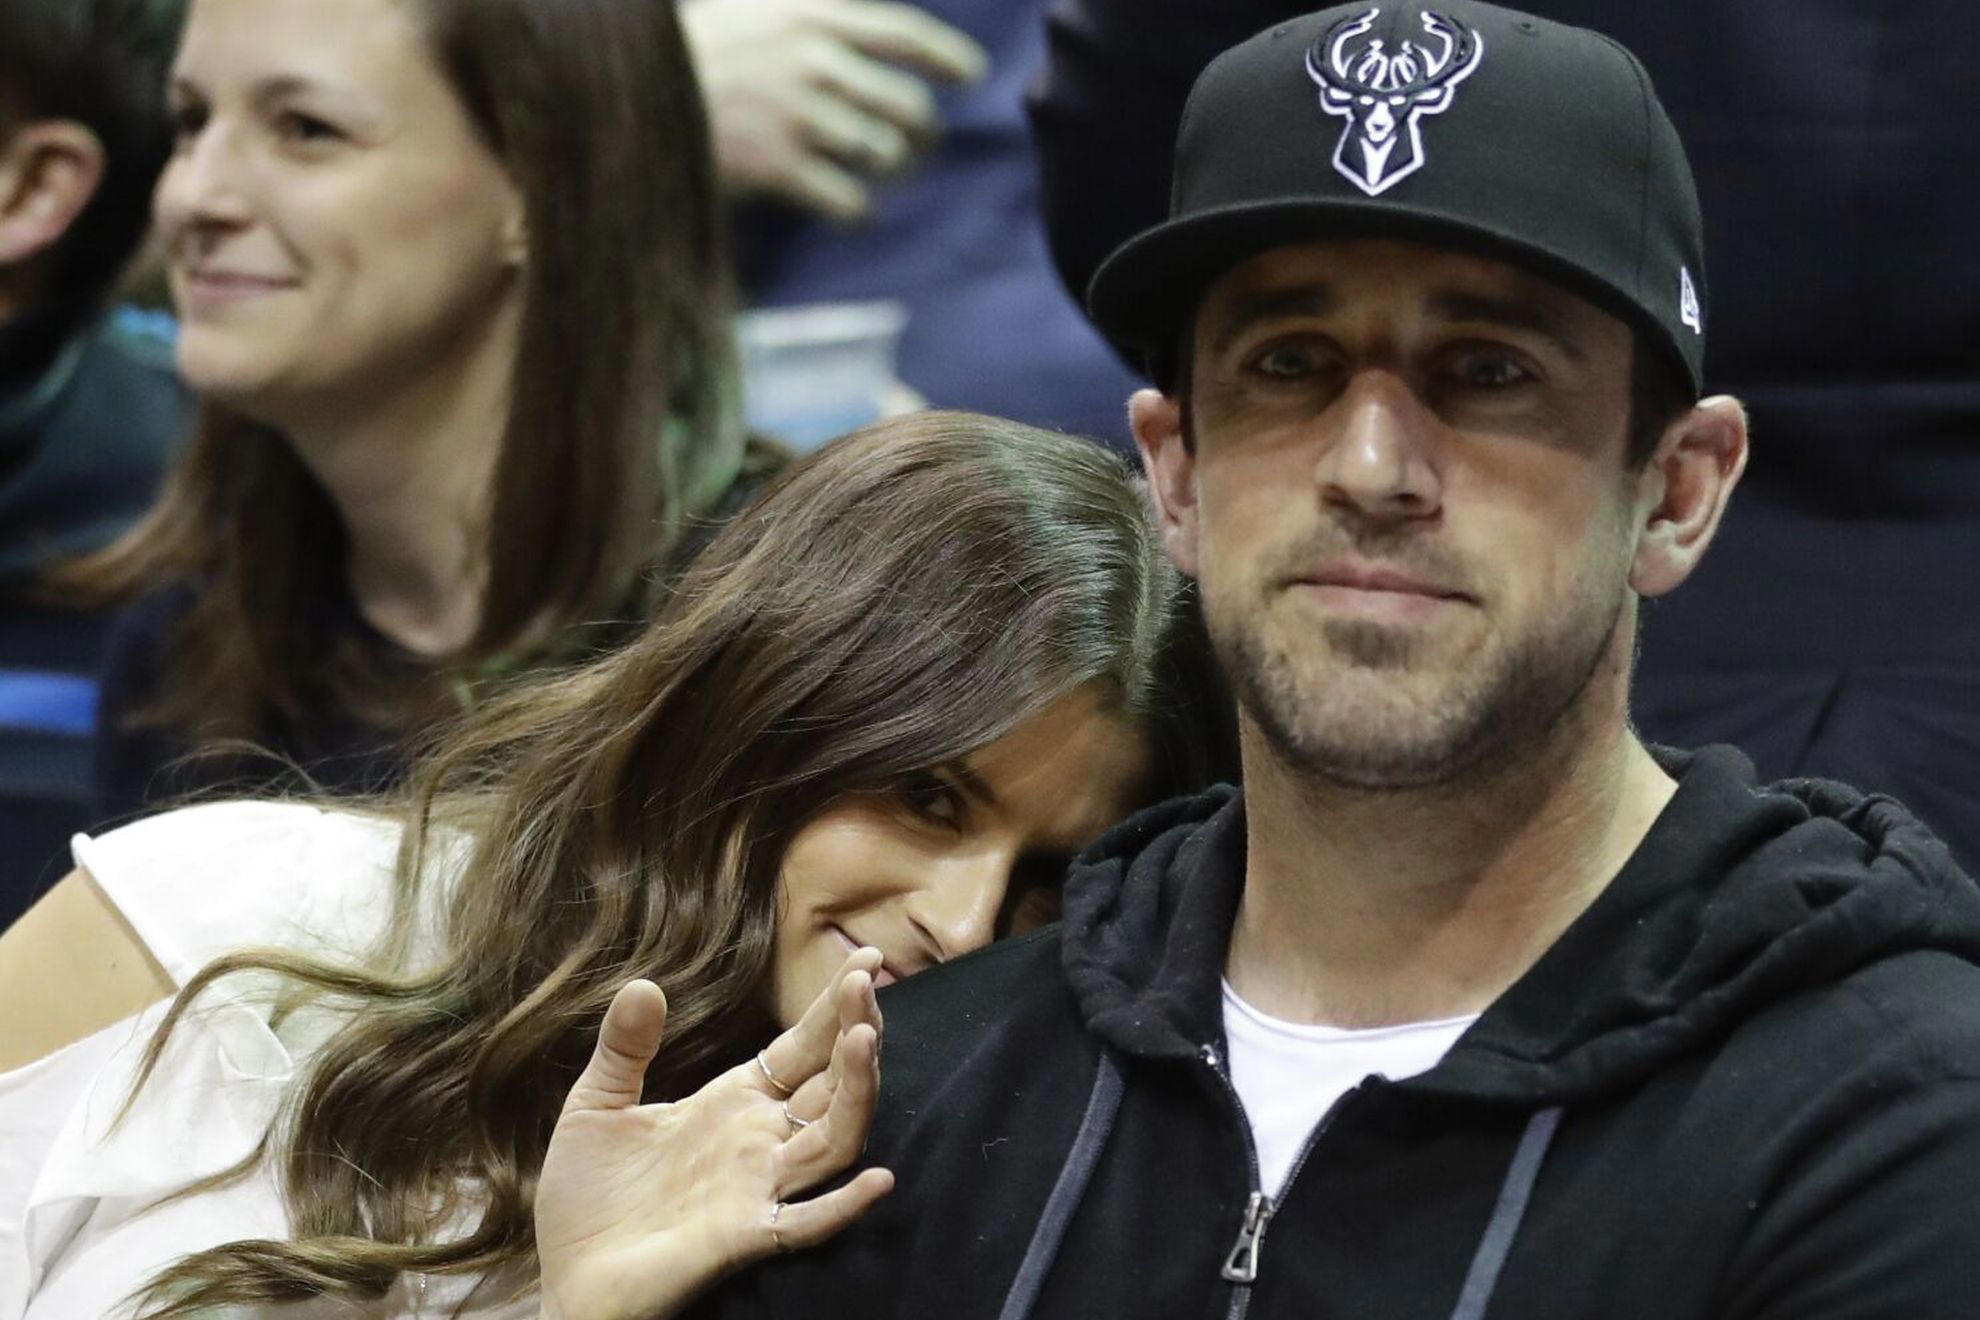 Danica Patrick, Aaron Rodgers' ex-girlfriend, reveals she was cheated on